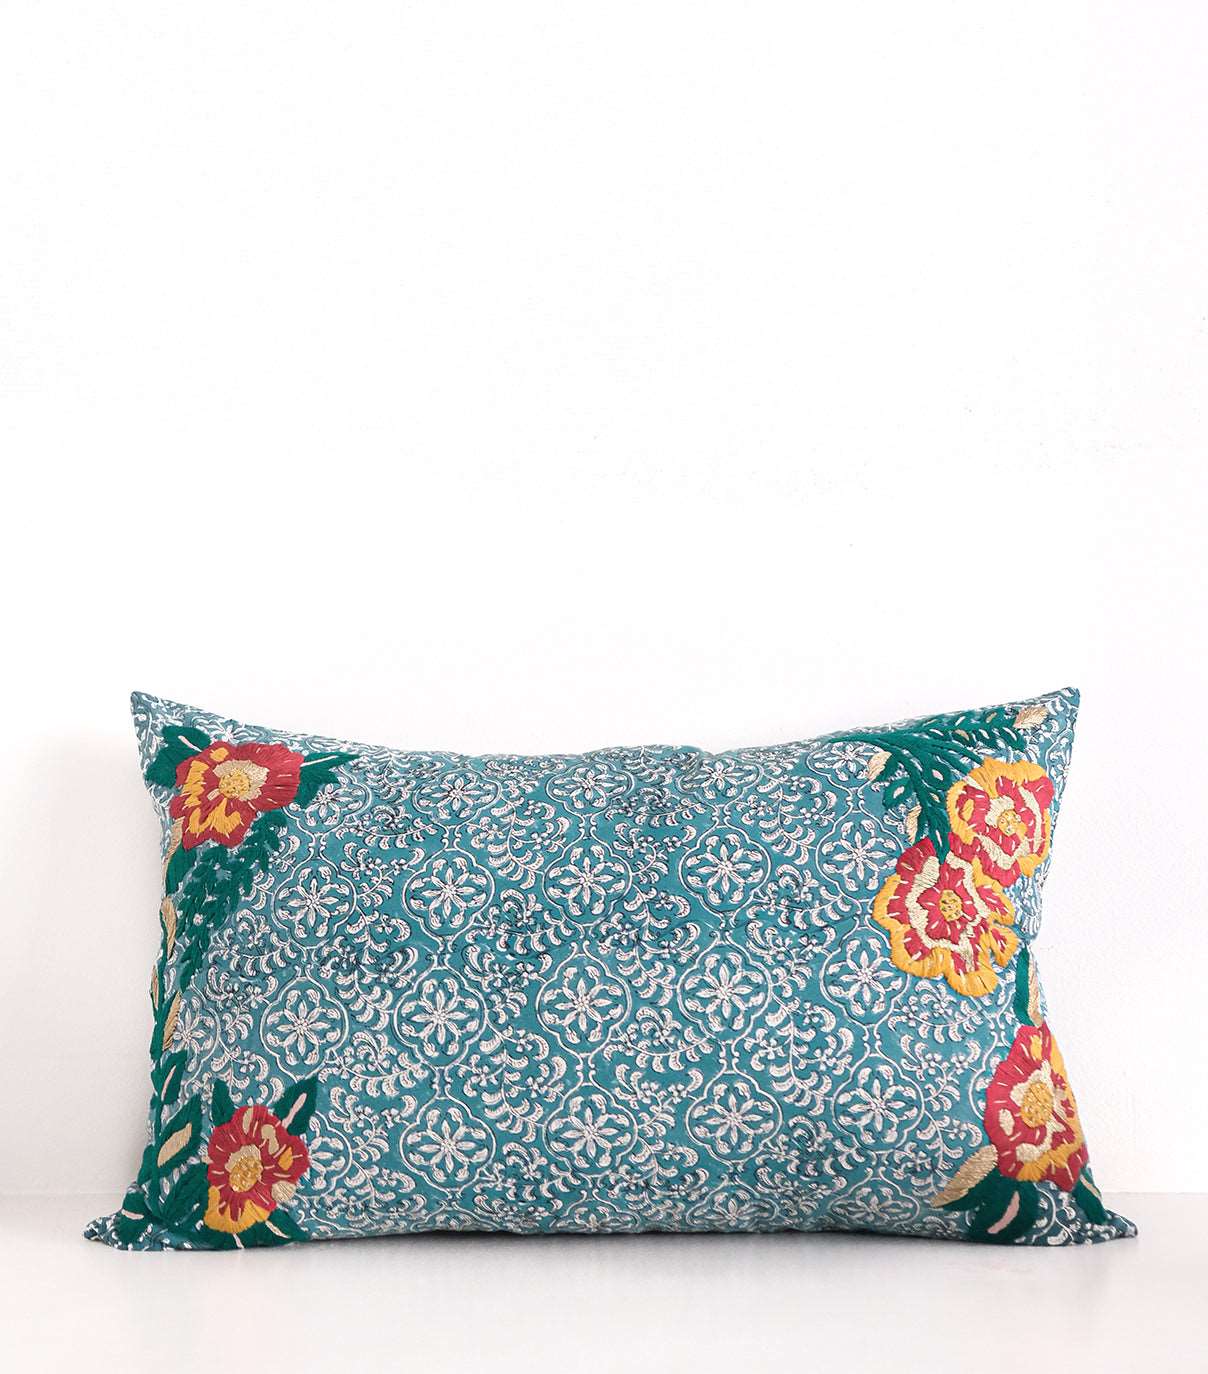 Block printed cotton , hand embroidered cushion cover